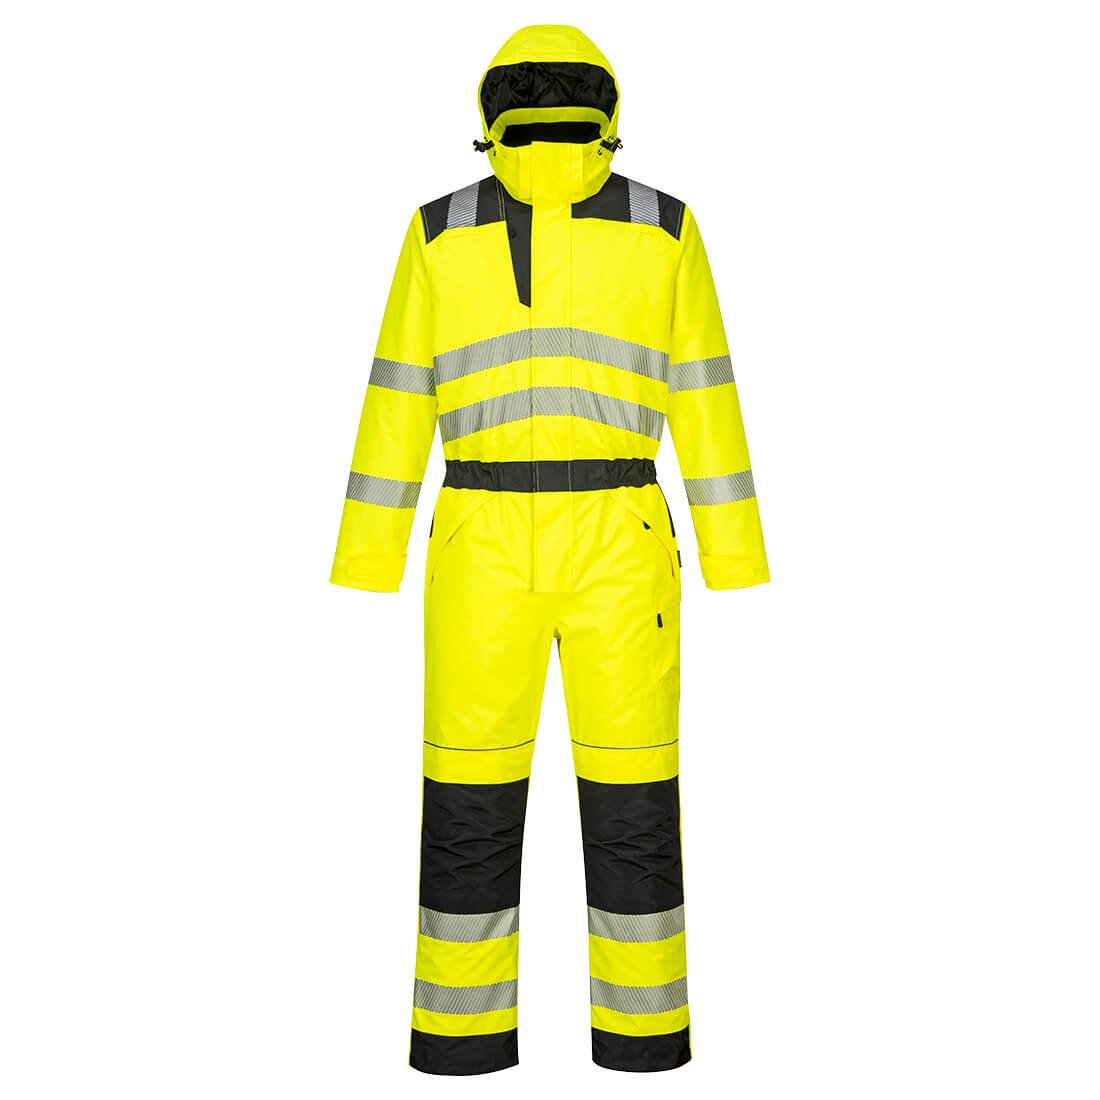 PW3 Hi-Vis Winter Coverall - arbeitskleidung-gmbh